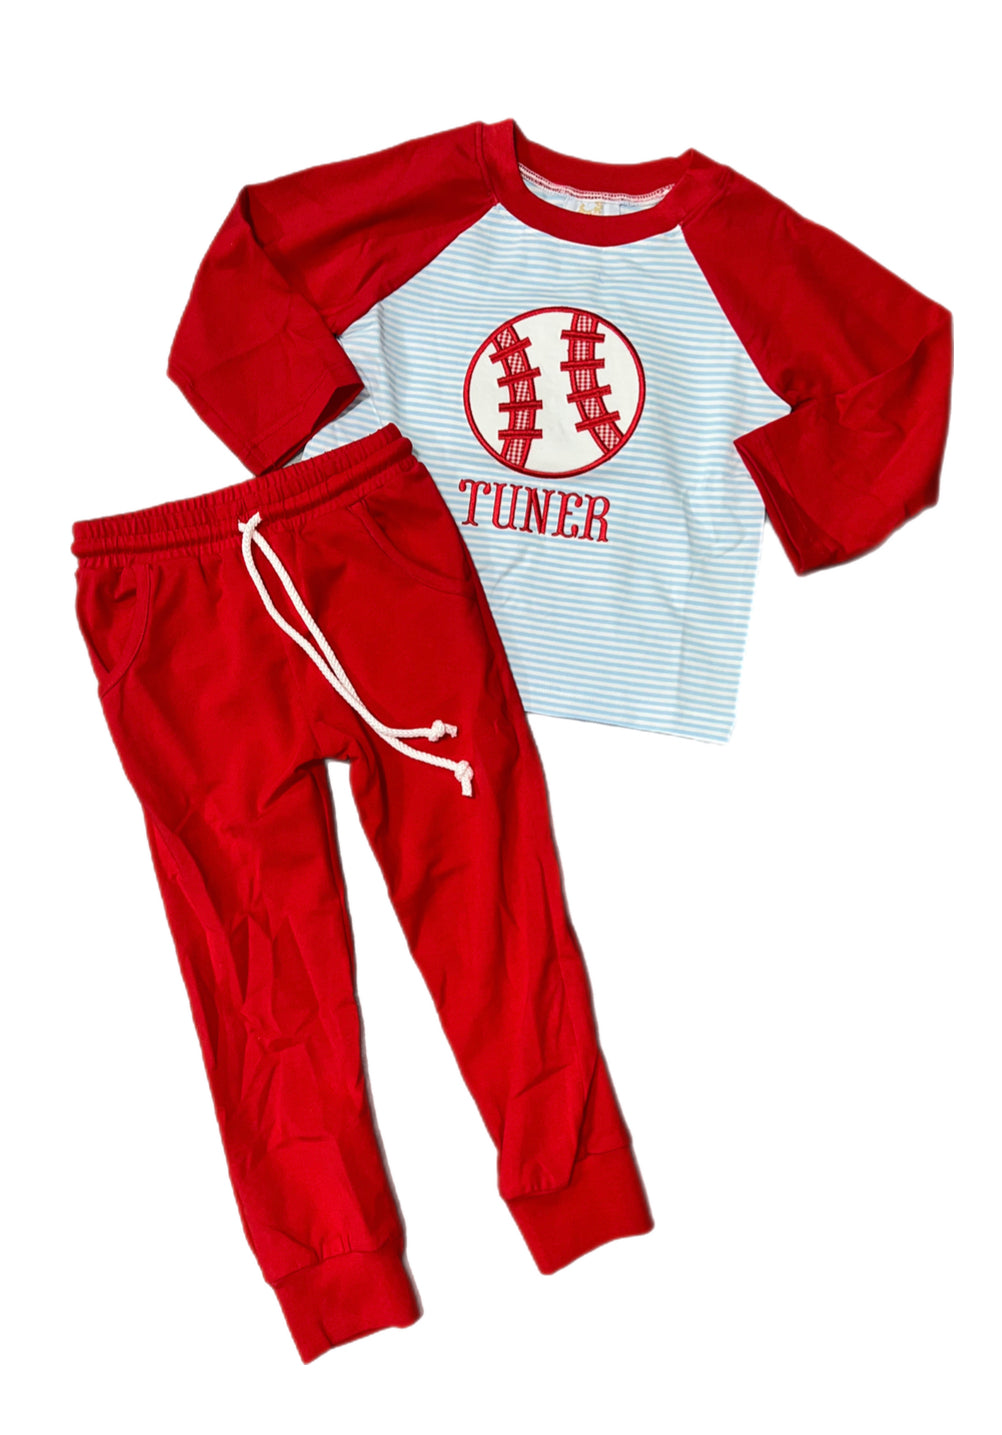 RTS: DEFECT-Boys Only Collection- Mini Stripe Baseball- Boys Knit Jogger Set "Tuner"